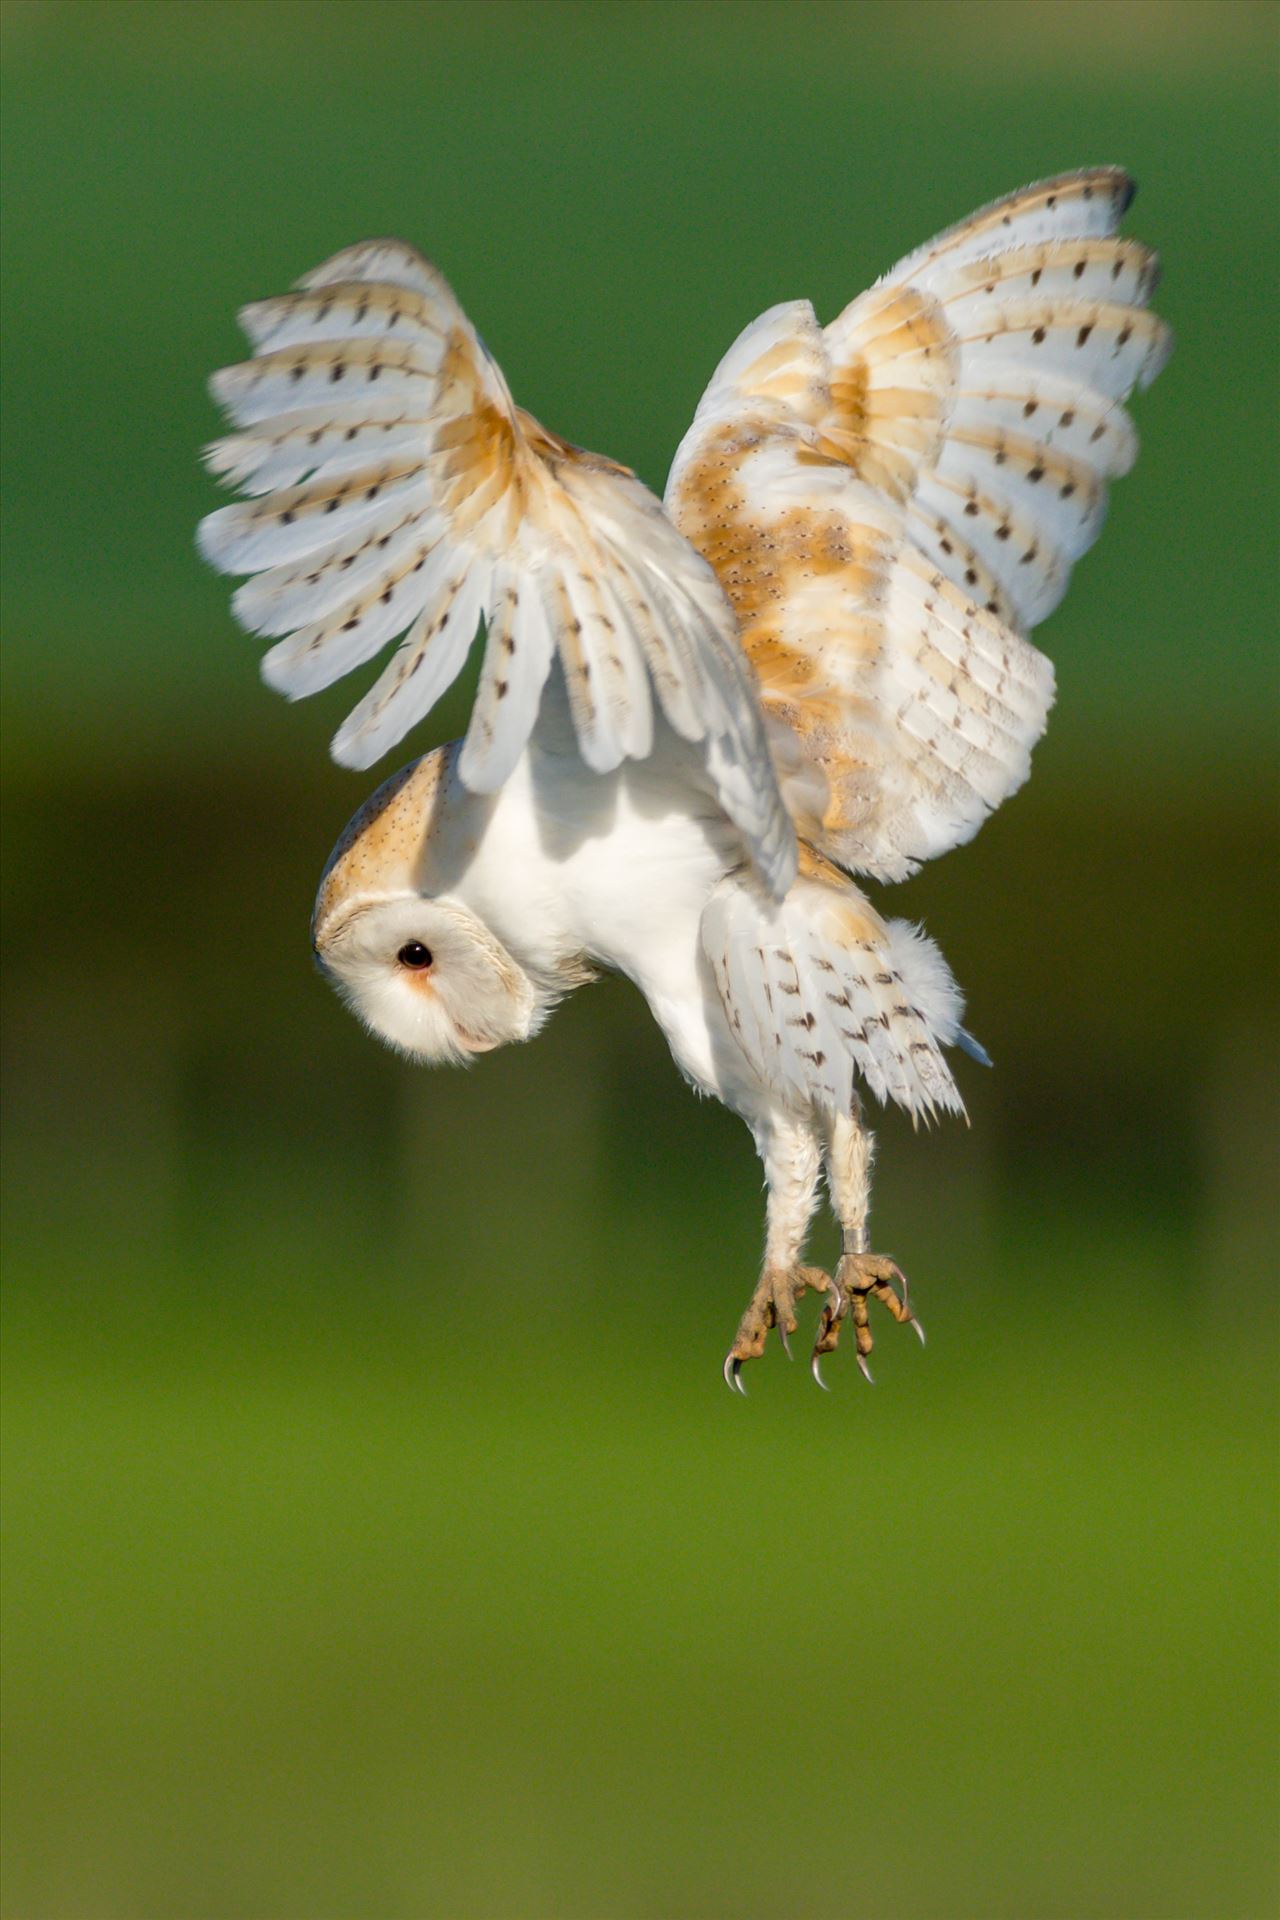 Barn Owl on the hunt 01 - A Barn Owl on the hunt for its breakfast by AJ Stoves Photography